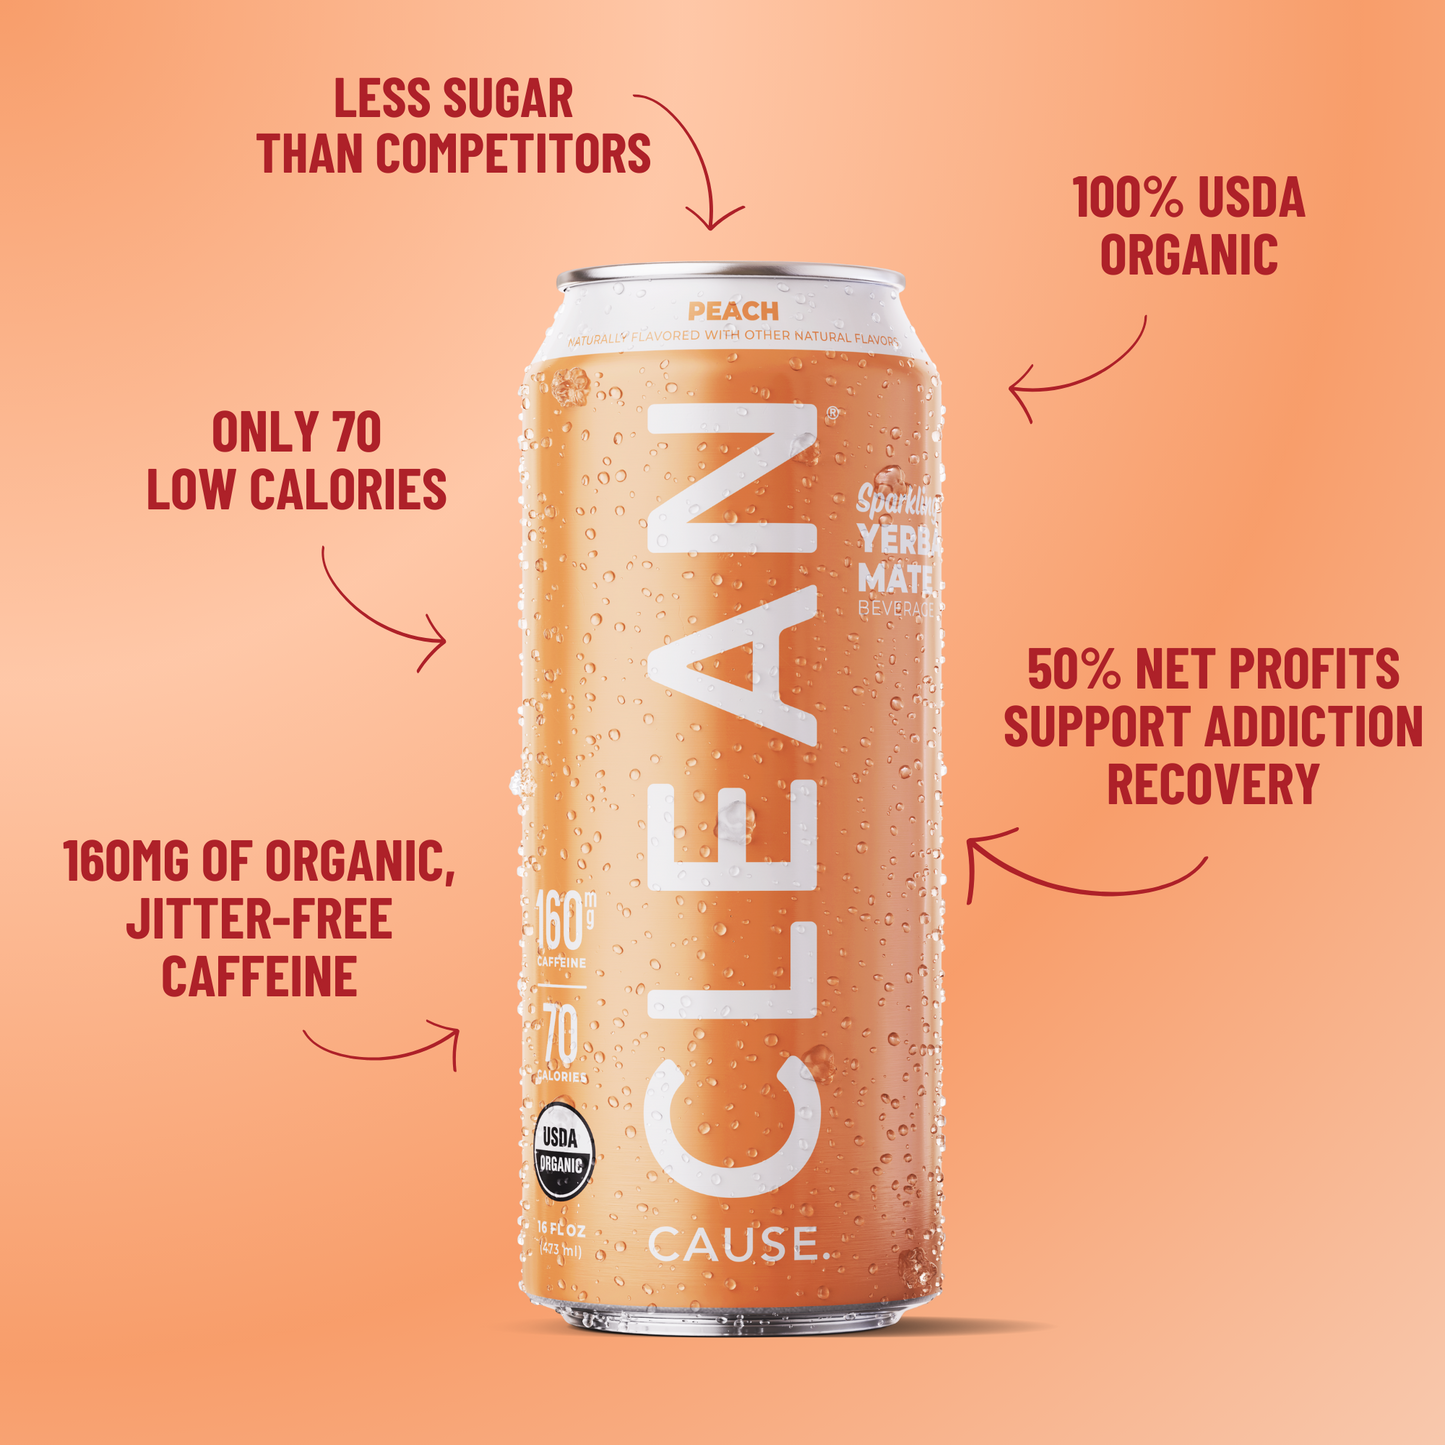 A can of CLEAN Cause Peach Yerba Mate with little attributes circling it: 160mg of organic jitter-free caffeine, only 70 calories, less sugar than competitors, 100% USDA organic, 50% net profits support addiction recovery